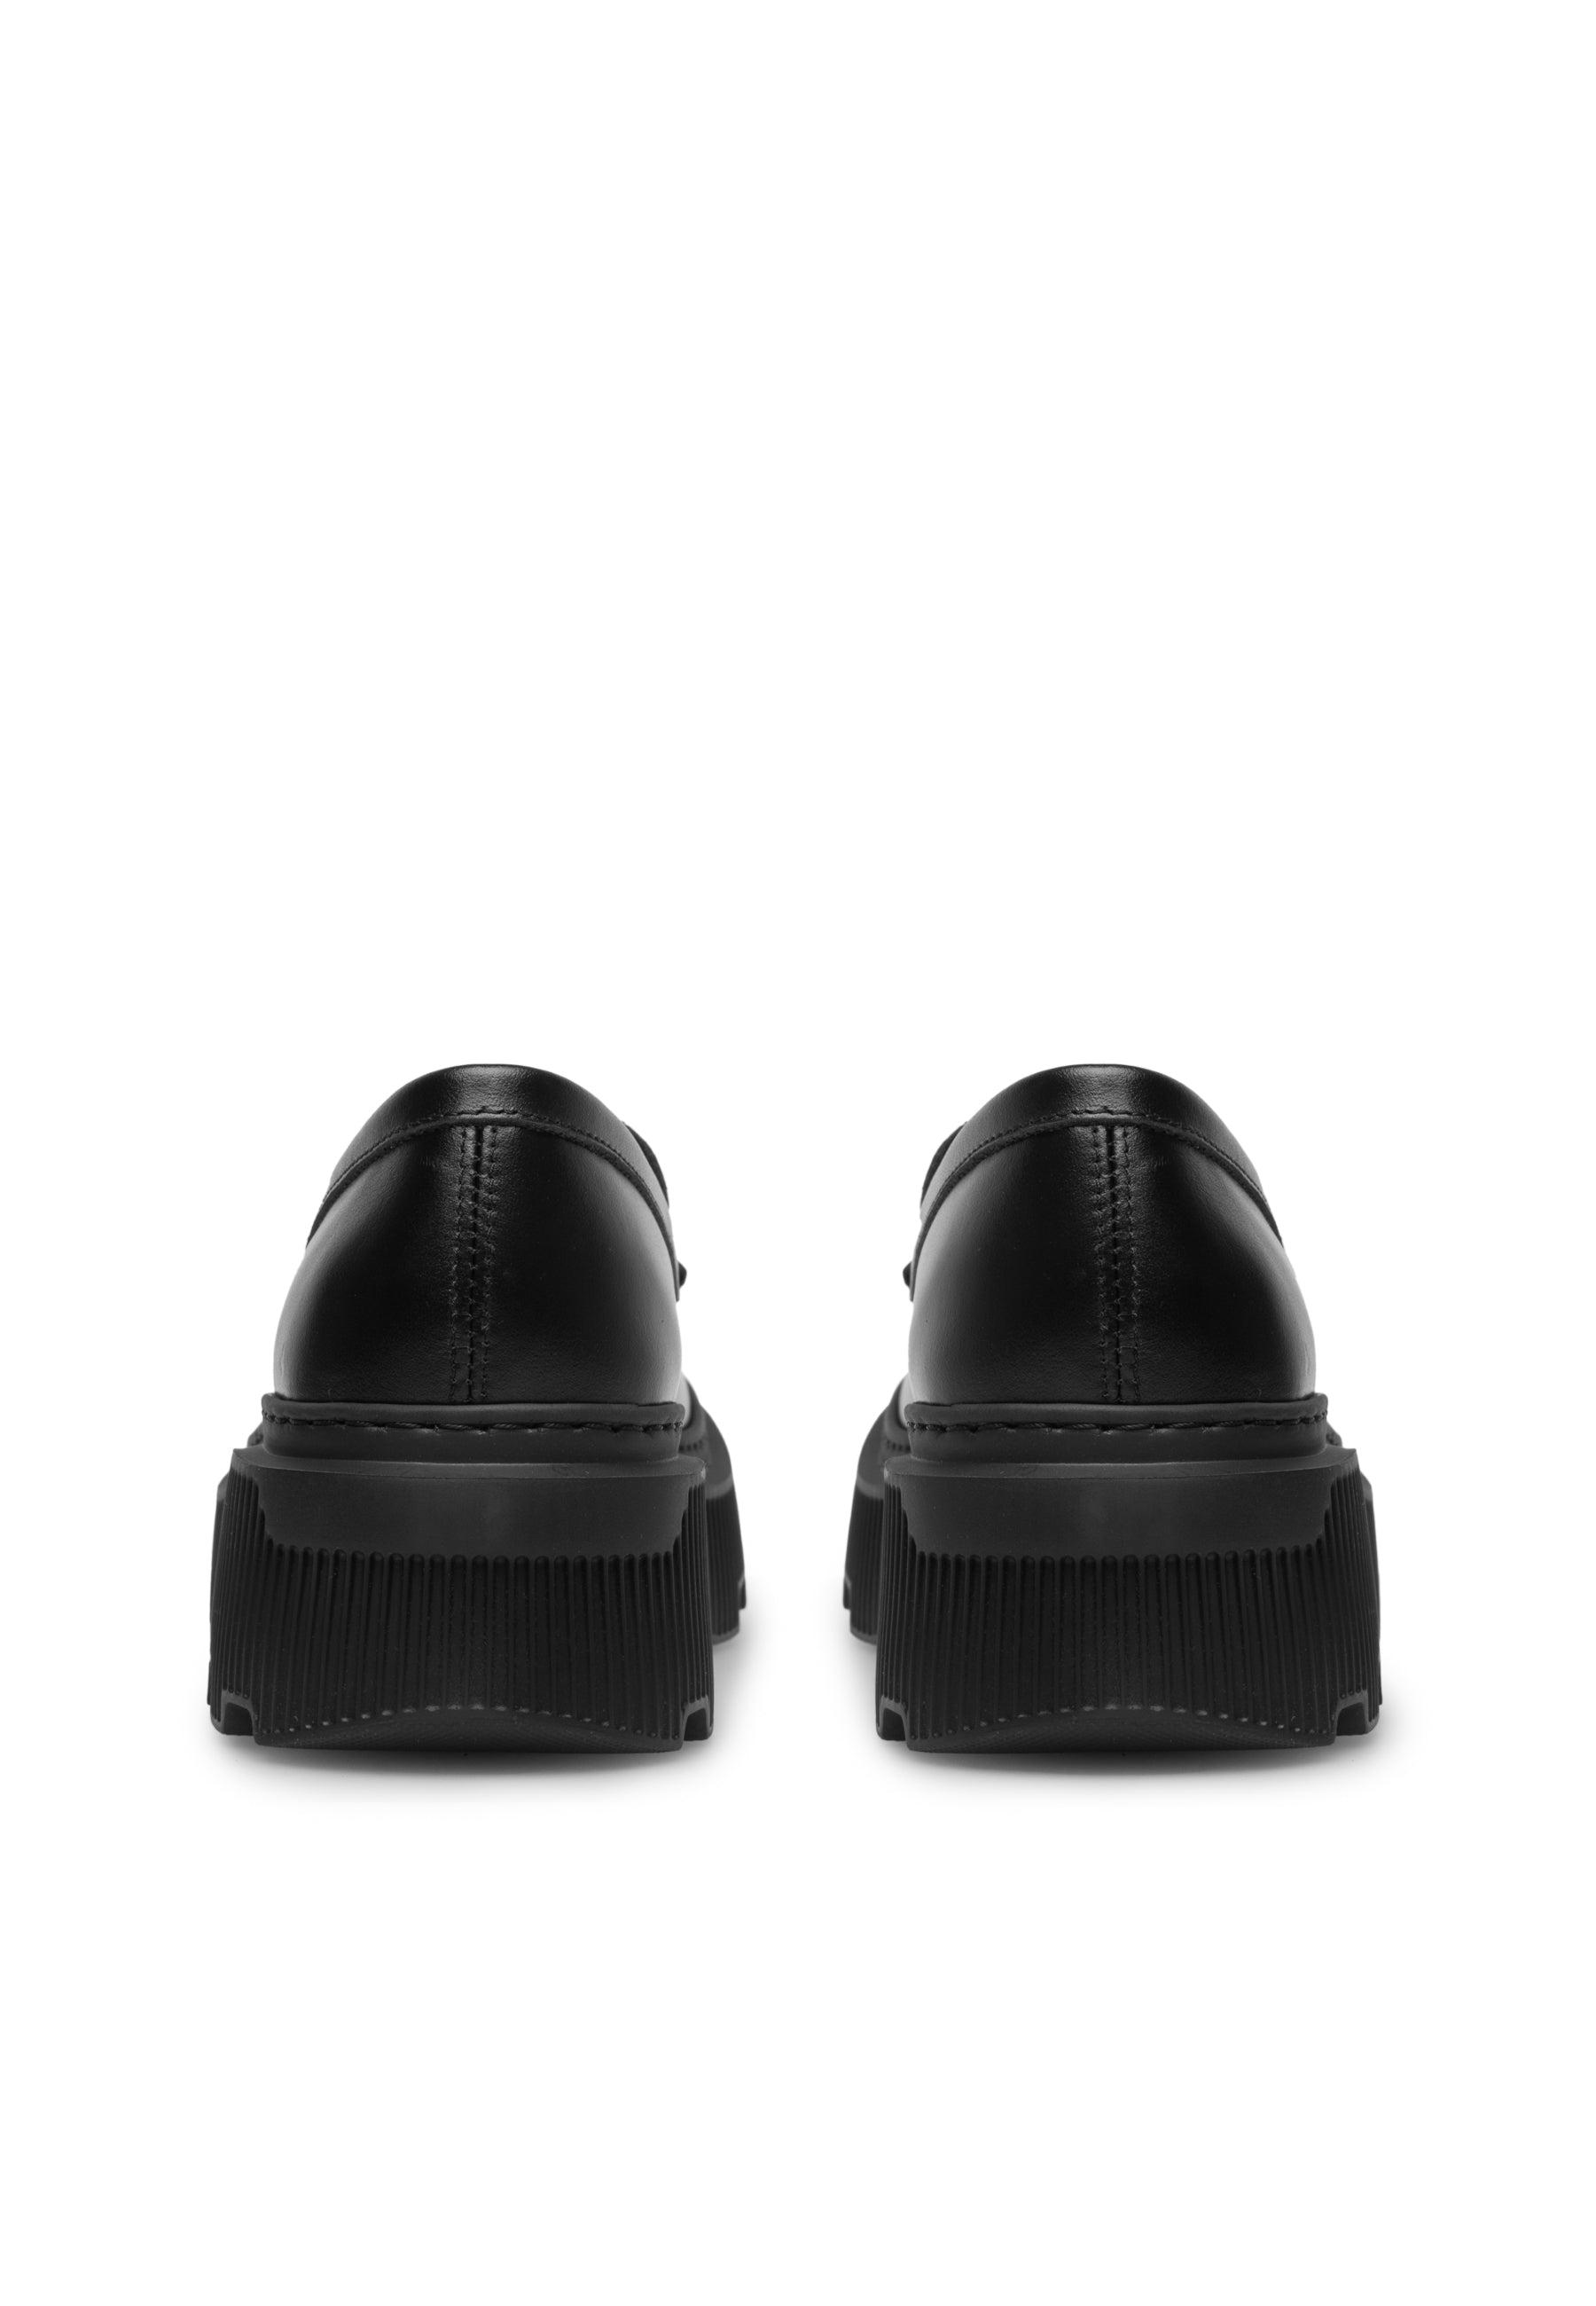 Penny Black Chunky Loafers LAST1630 - 5